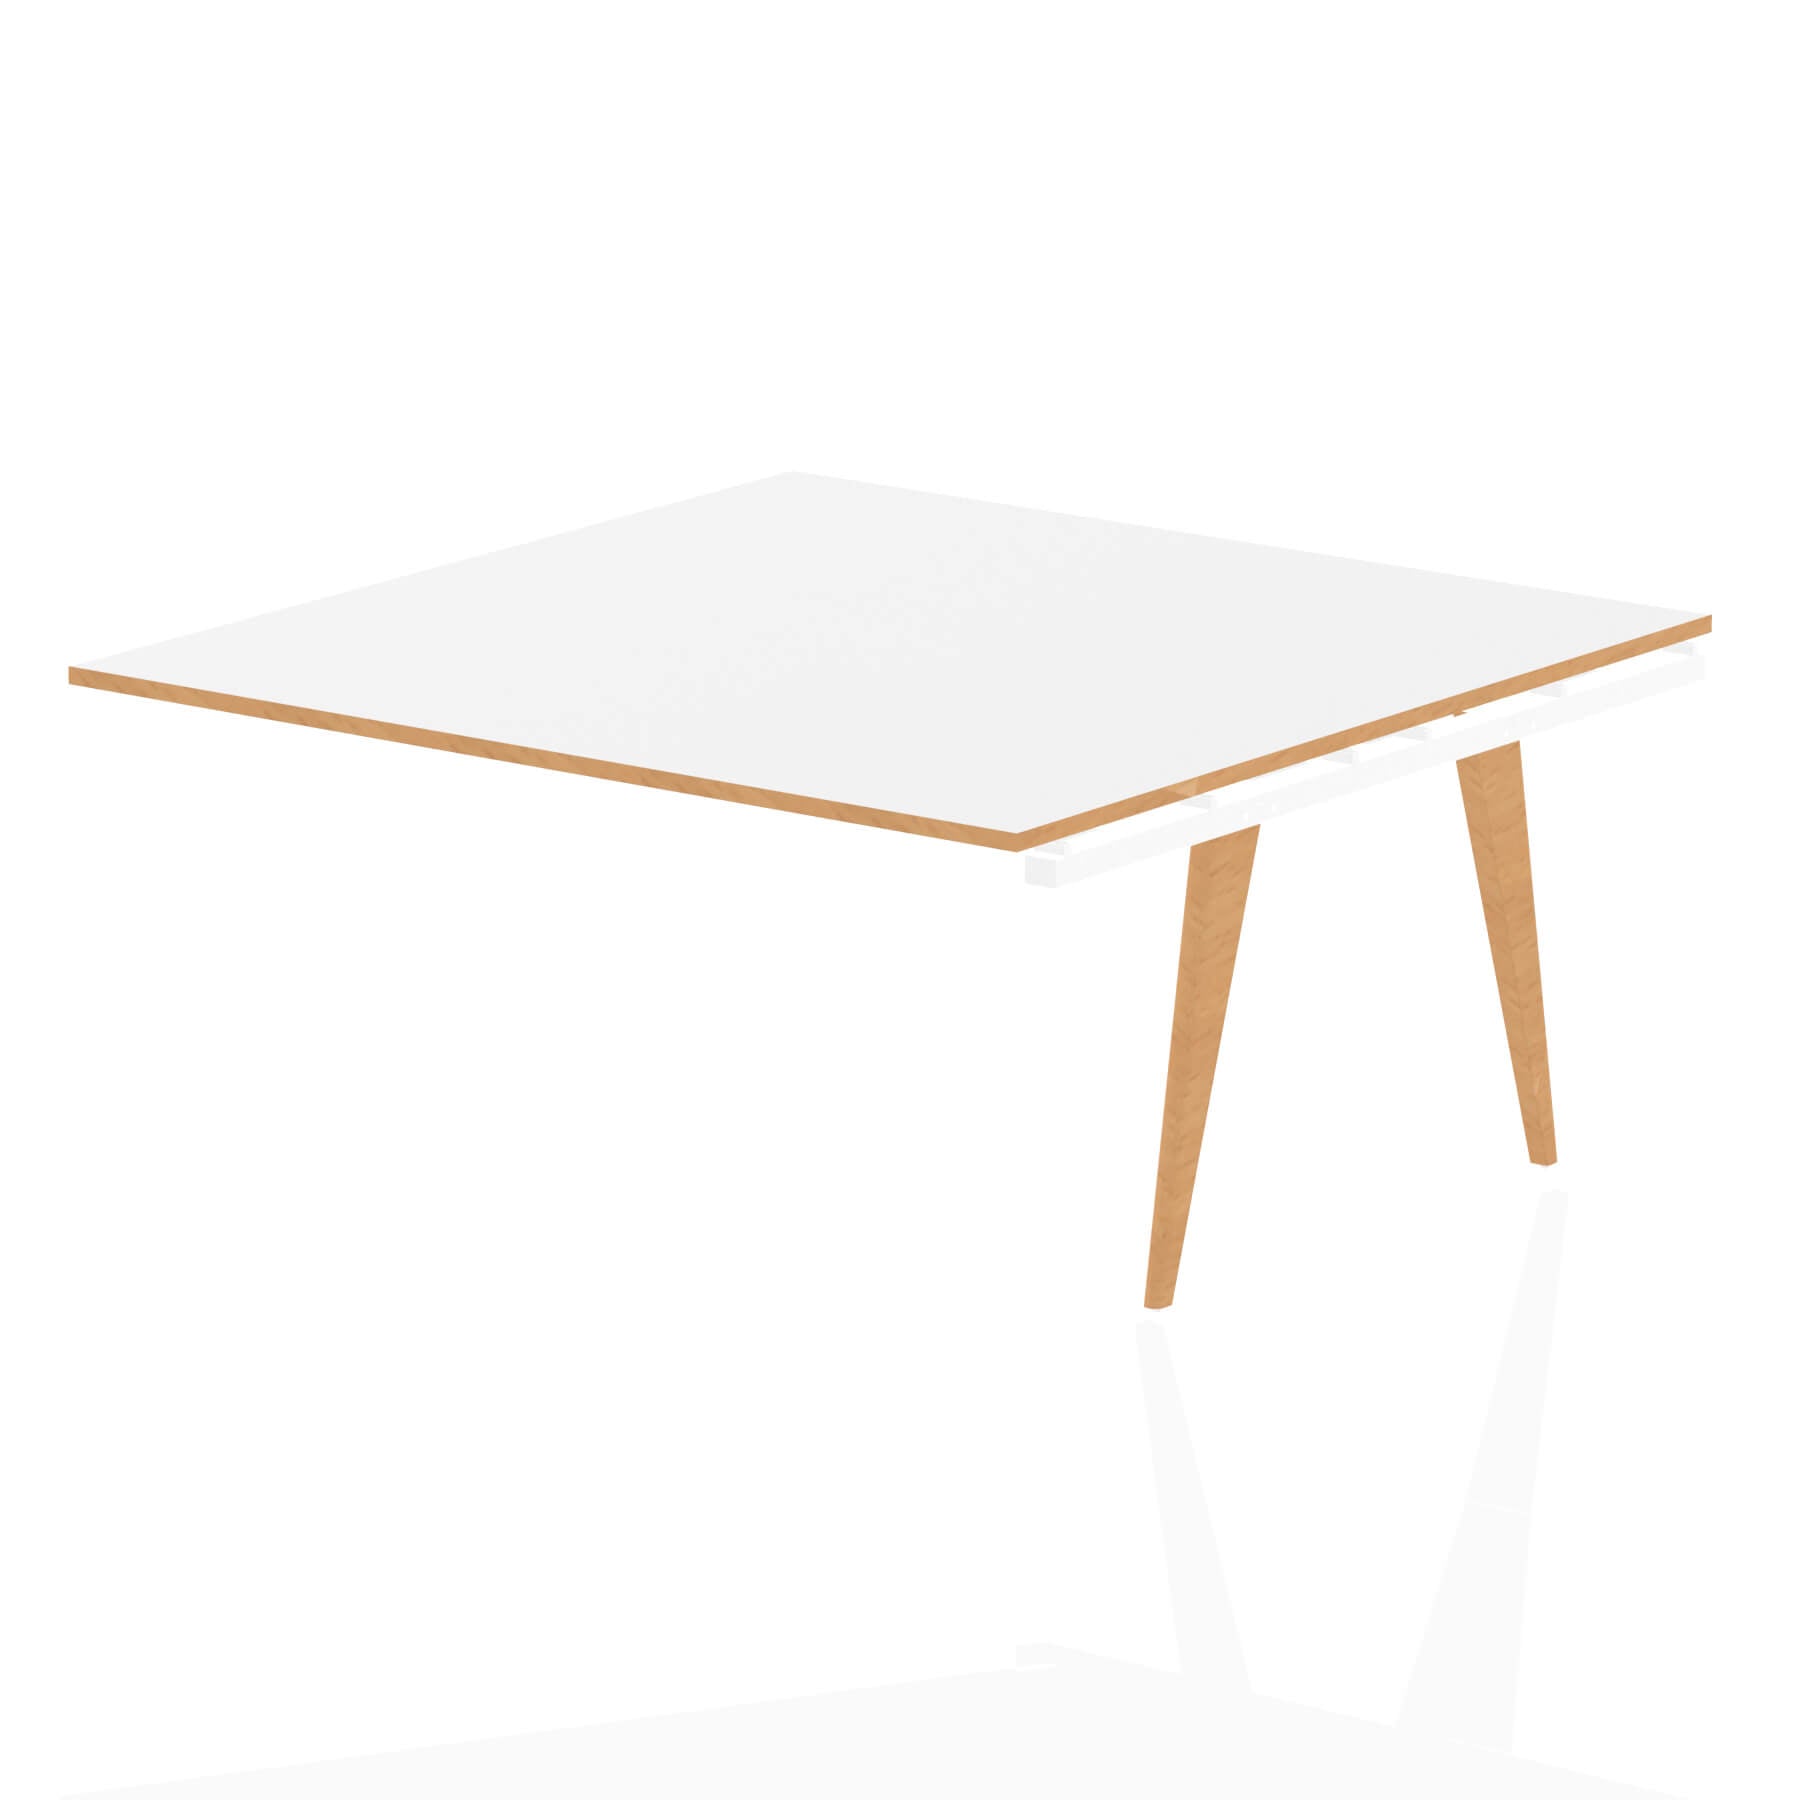 Oslo 1600mm Square Boardroom Table Ext Kit - MFC Material, White Frame, Wooden Legs, Self-Assembly, 5-Year Guarantee